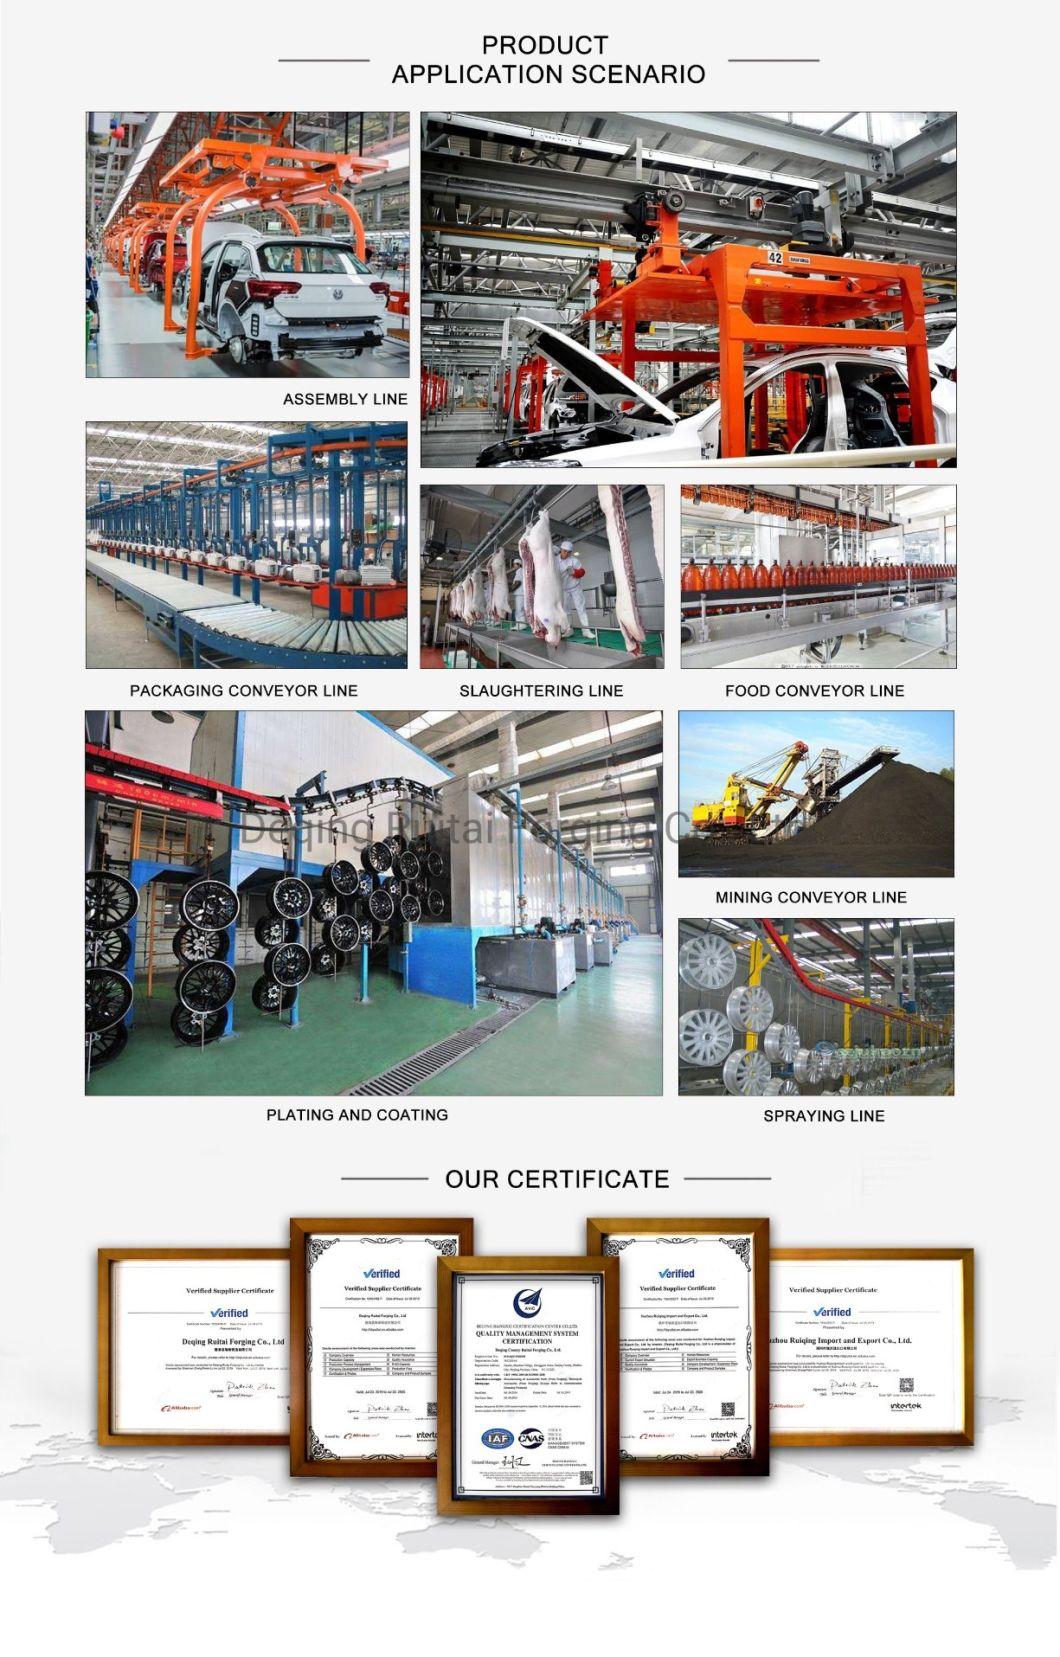 China Manufacturer of Forged Machinery Parts Machining Metal Parts for Standard Chain and Steel Forging Chain with Standard Series for Conveyor System